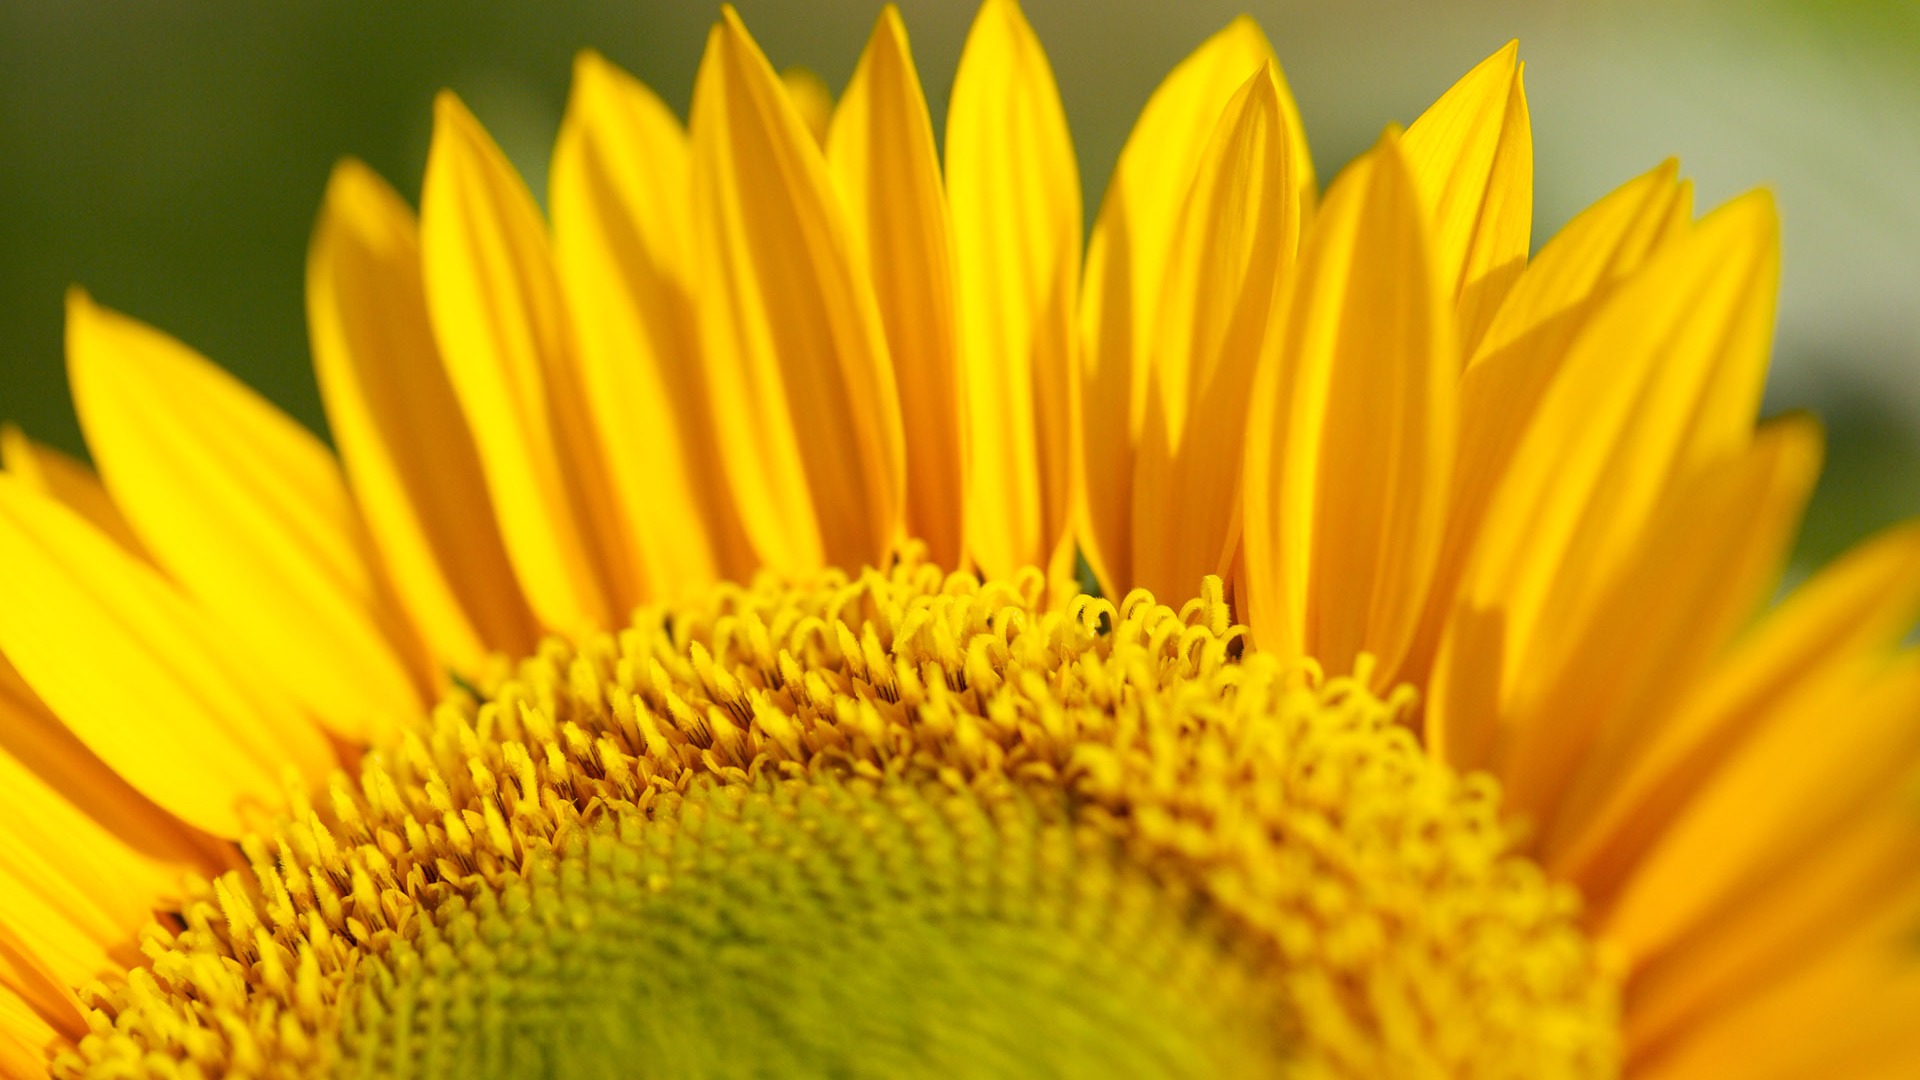 Sunny sunflower photo HD Wallpapers #29 - 1920x1080